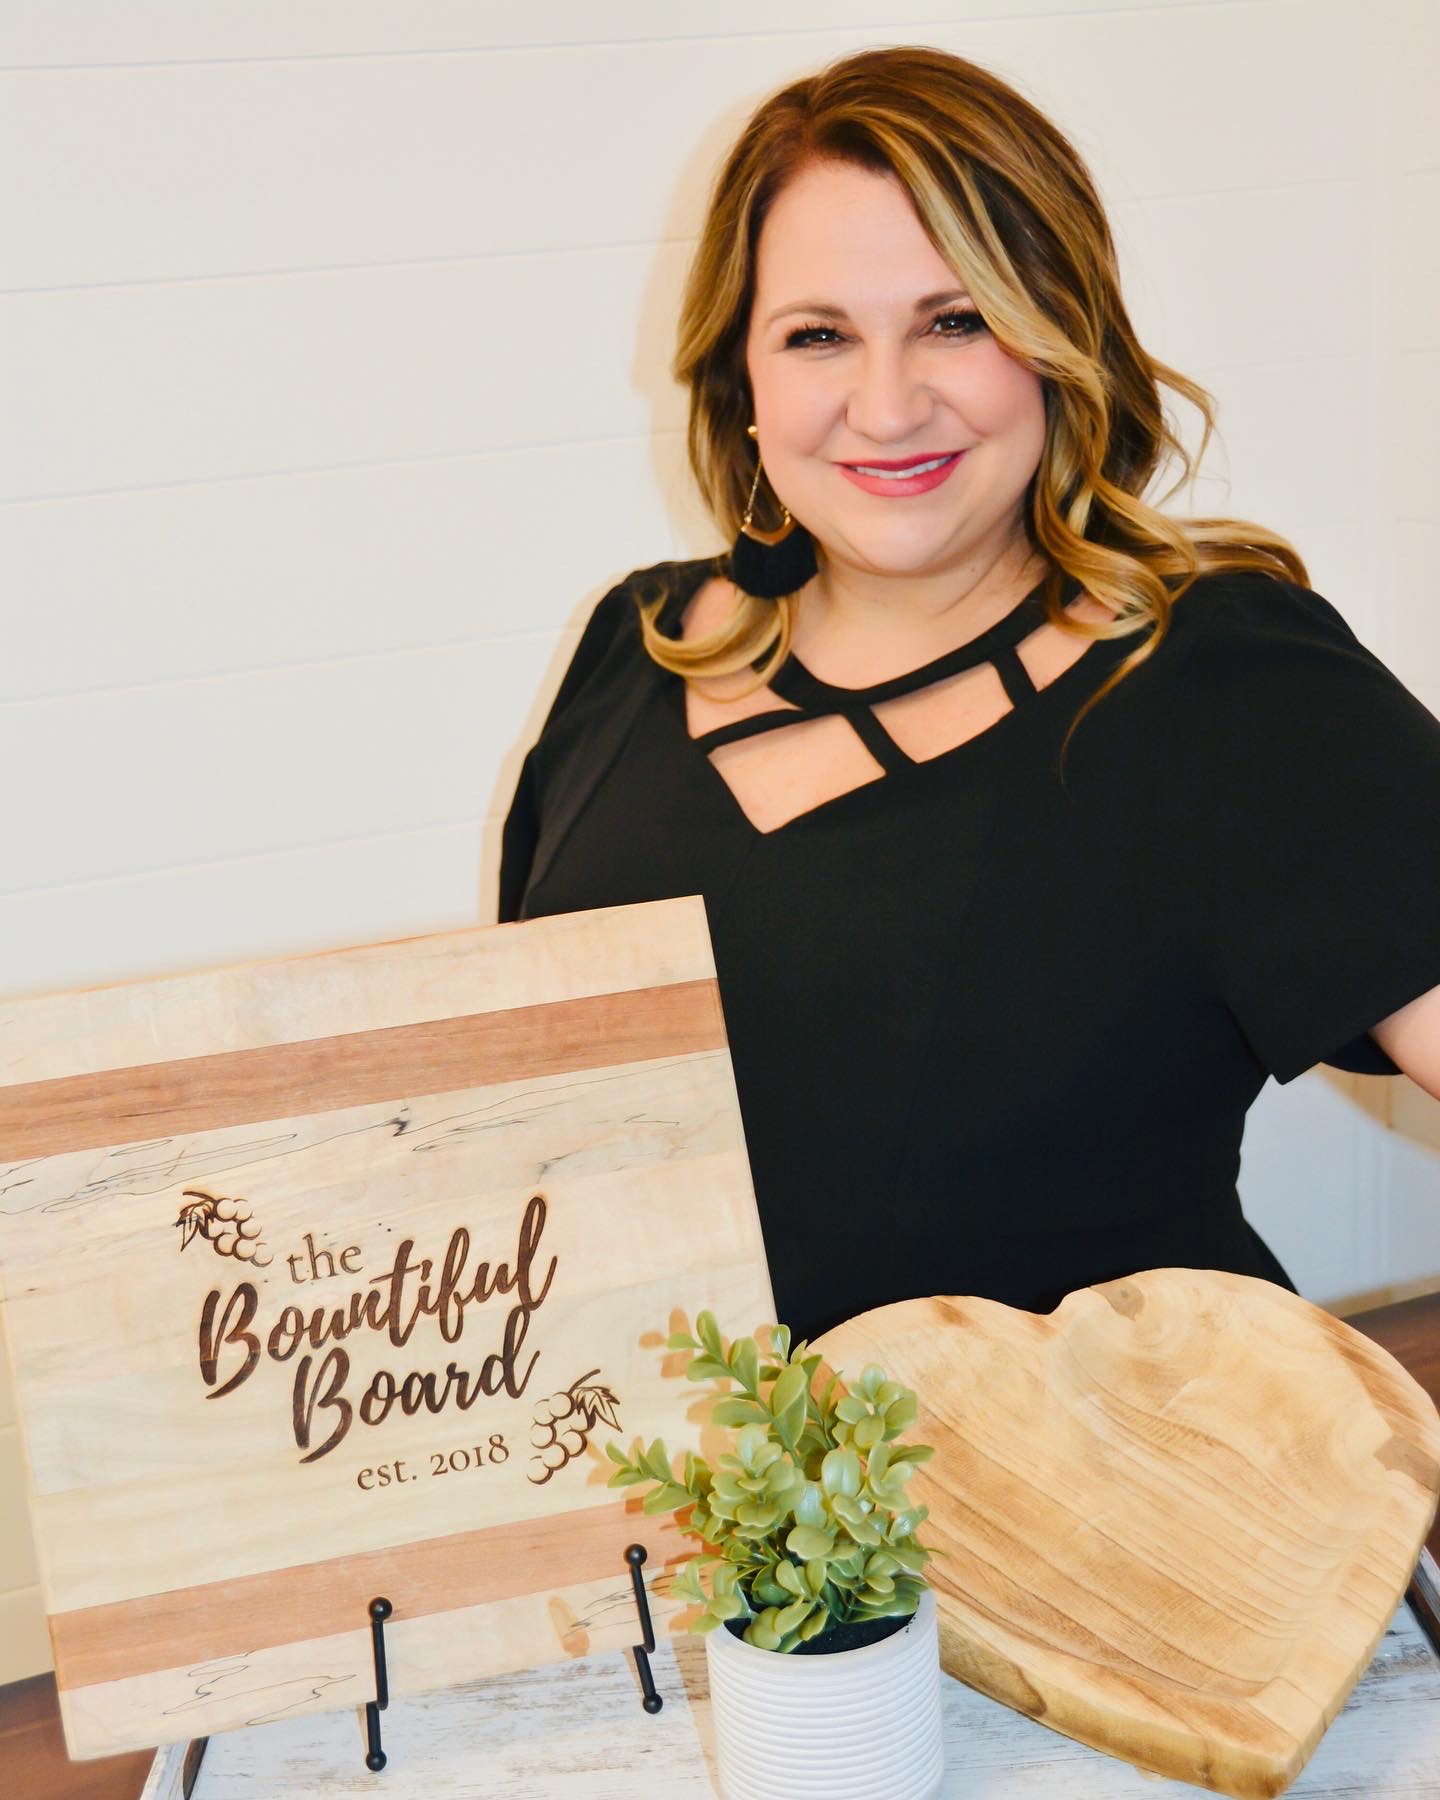 A photo of a woman smiling next to a sign that reads "the Beautiful Board"